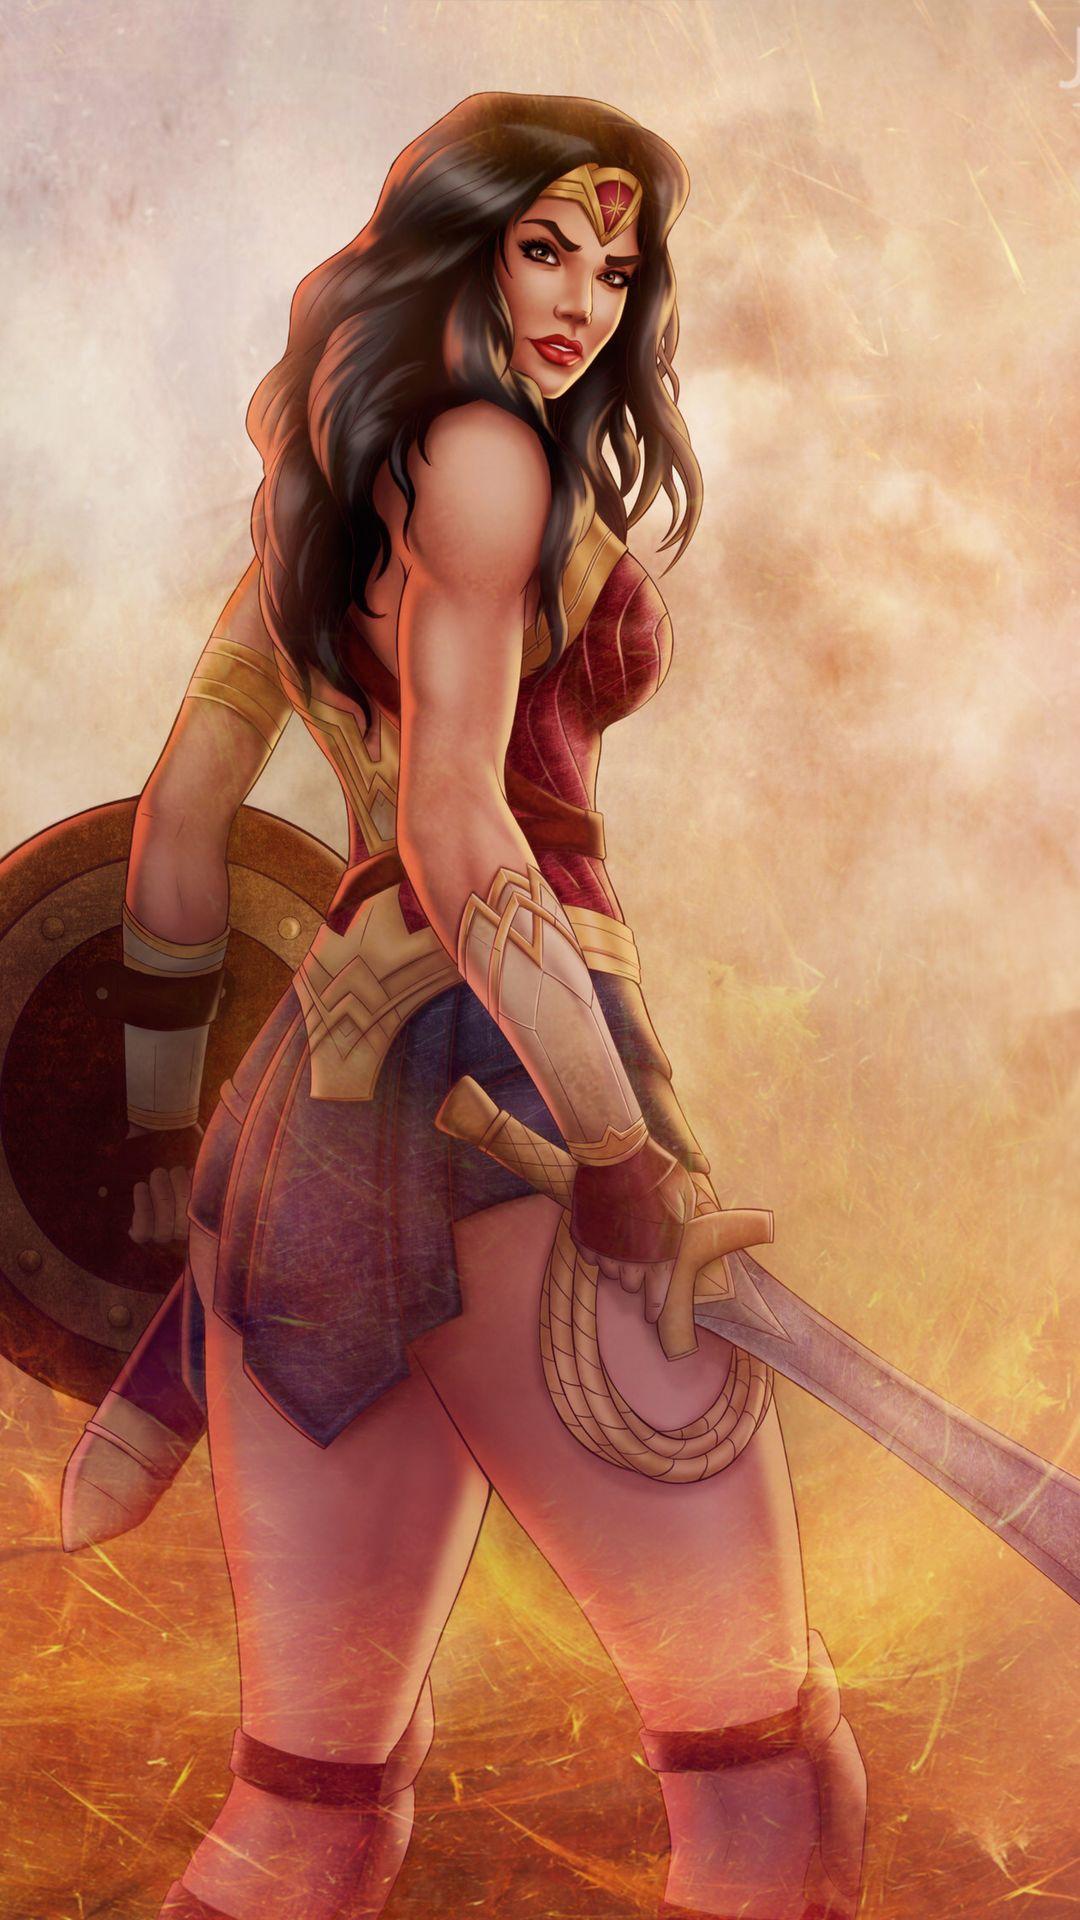 Wonder Woman HD Wallpaper For Android Apk